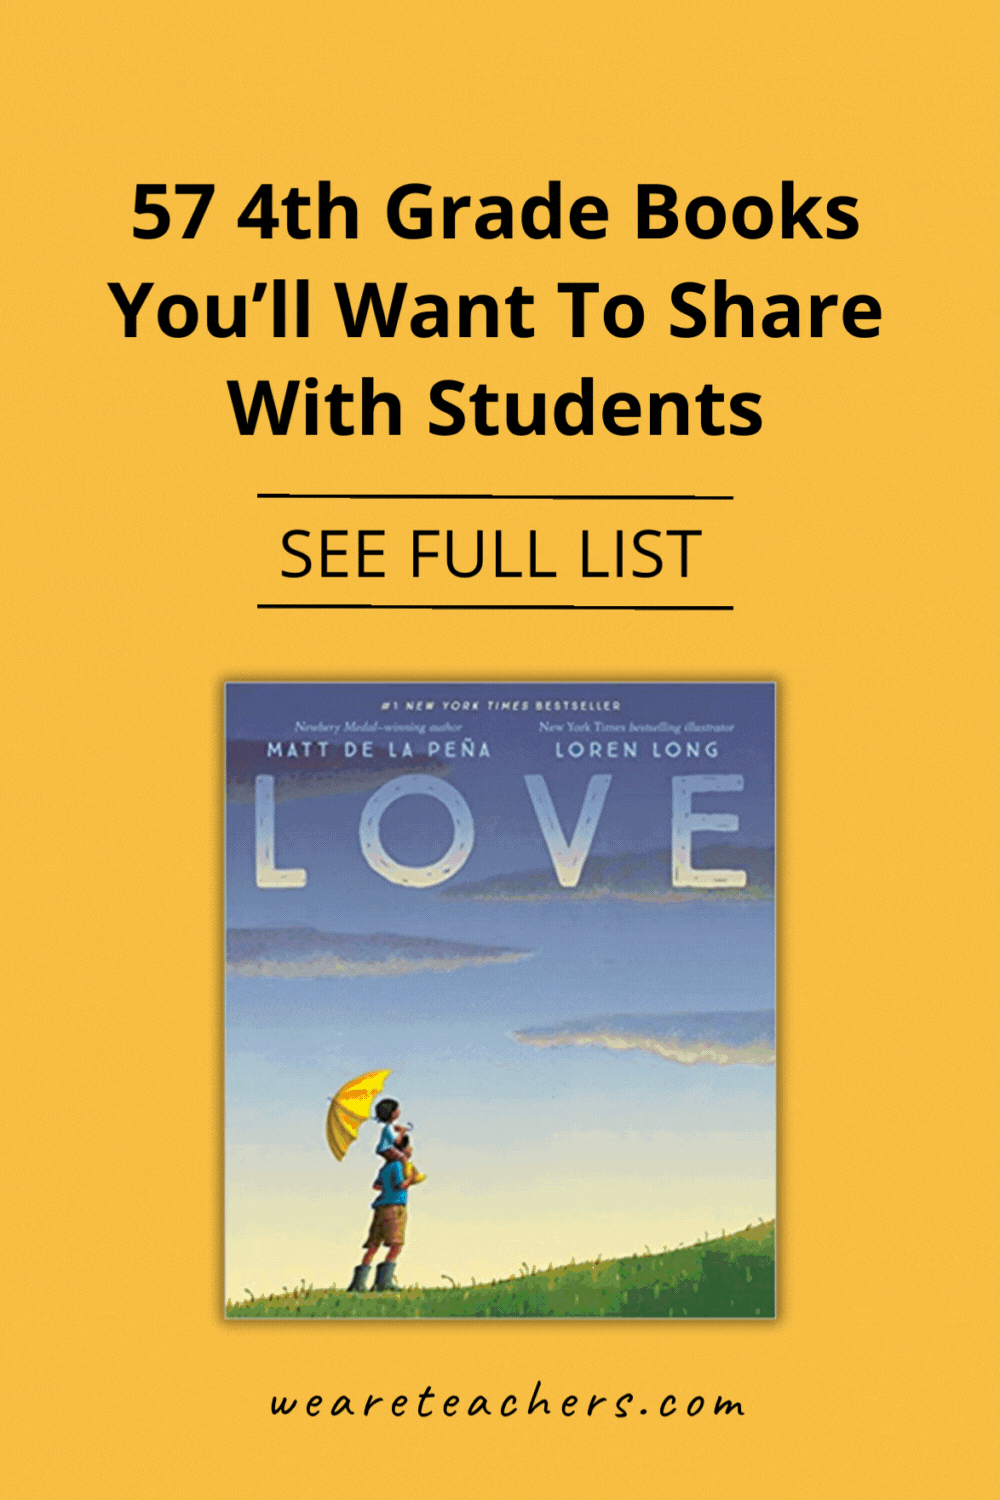 Looking for some new 4th grade books? Here are some of our recent favorites perfect for freshening up your classroom library!